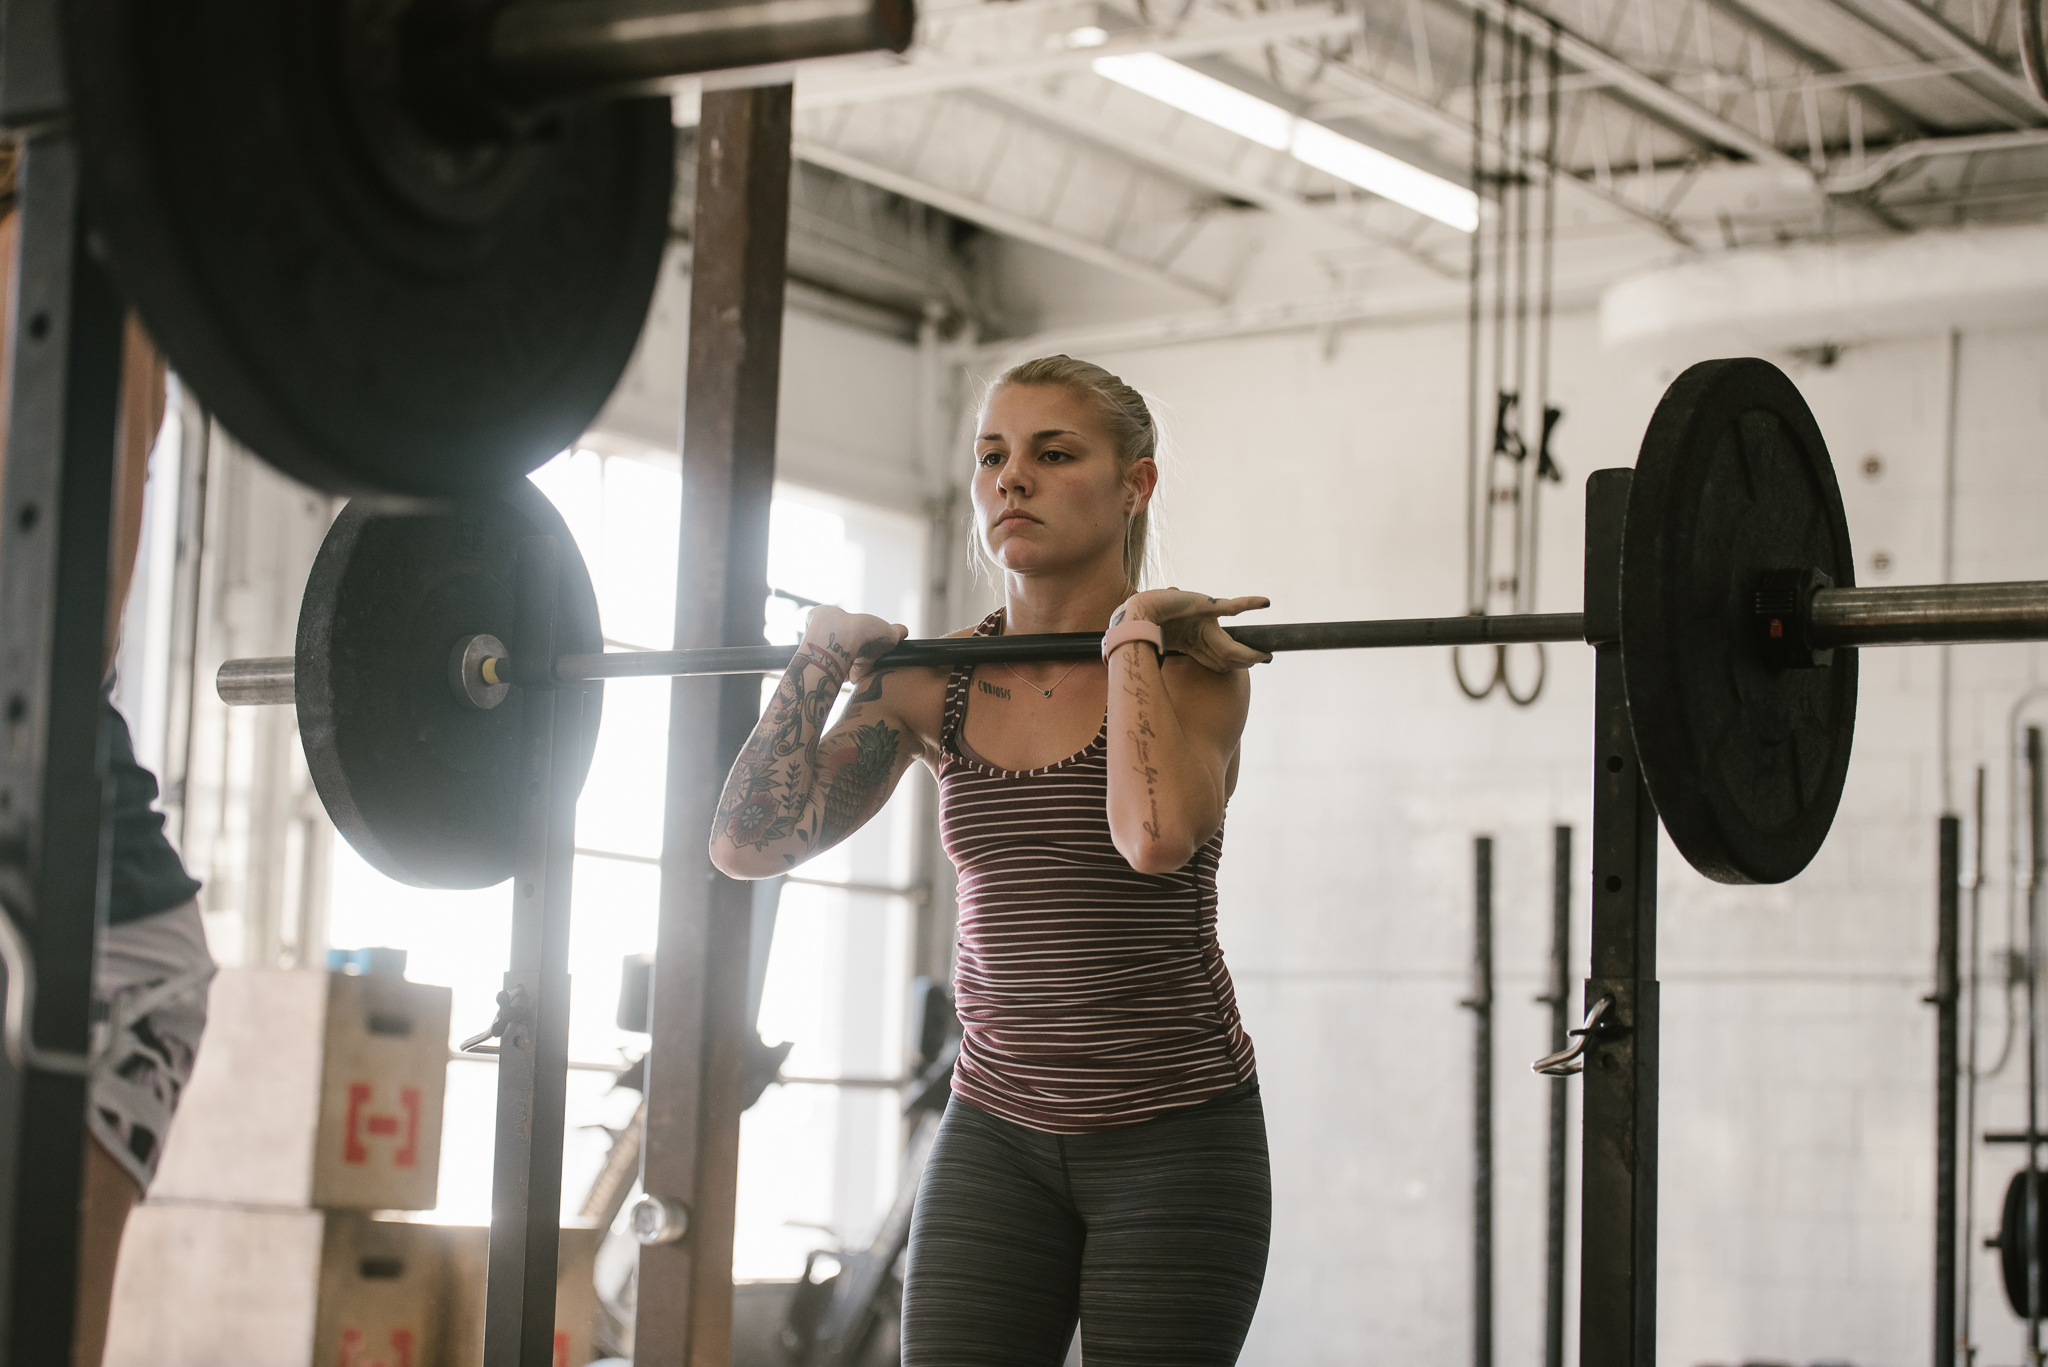 Austin and Round Rock Commercial Photography - Emily Ingalls Photography - Sports and Fitness Photography - CrossFit Central_CrossFit and Weight lifting Photography-10.jpg